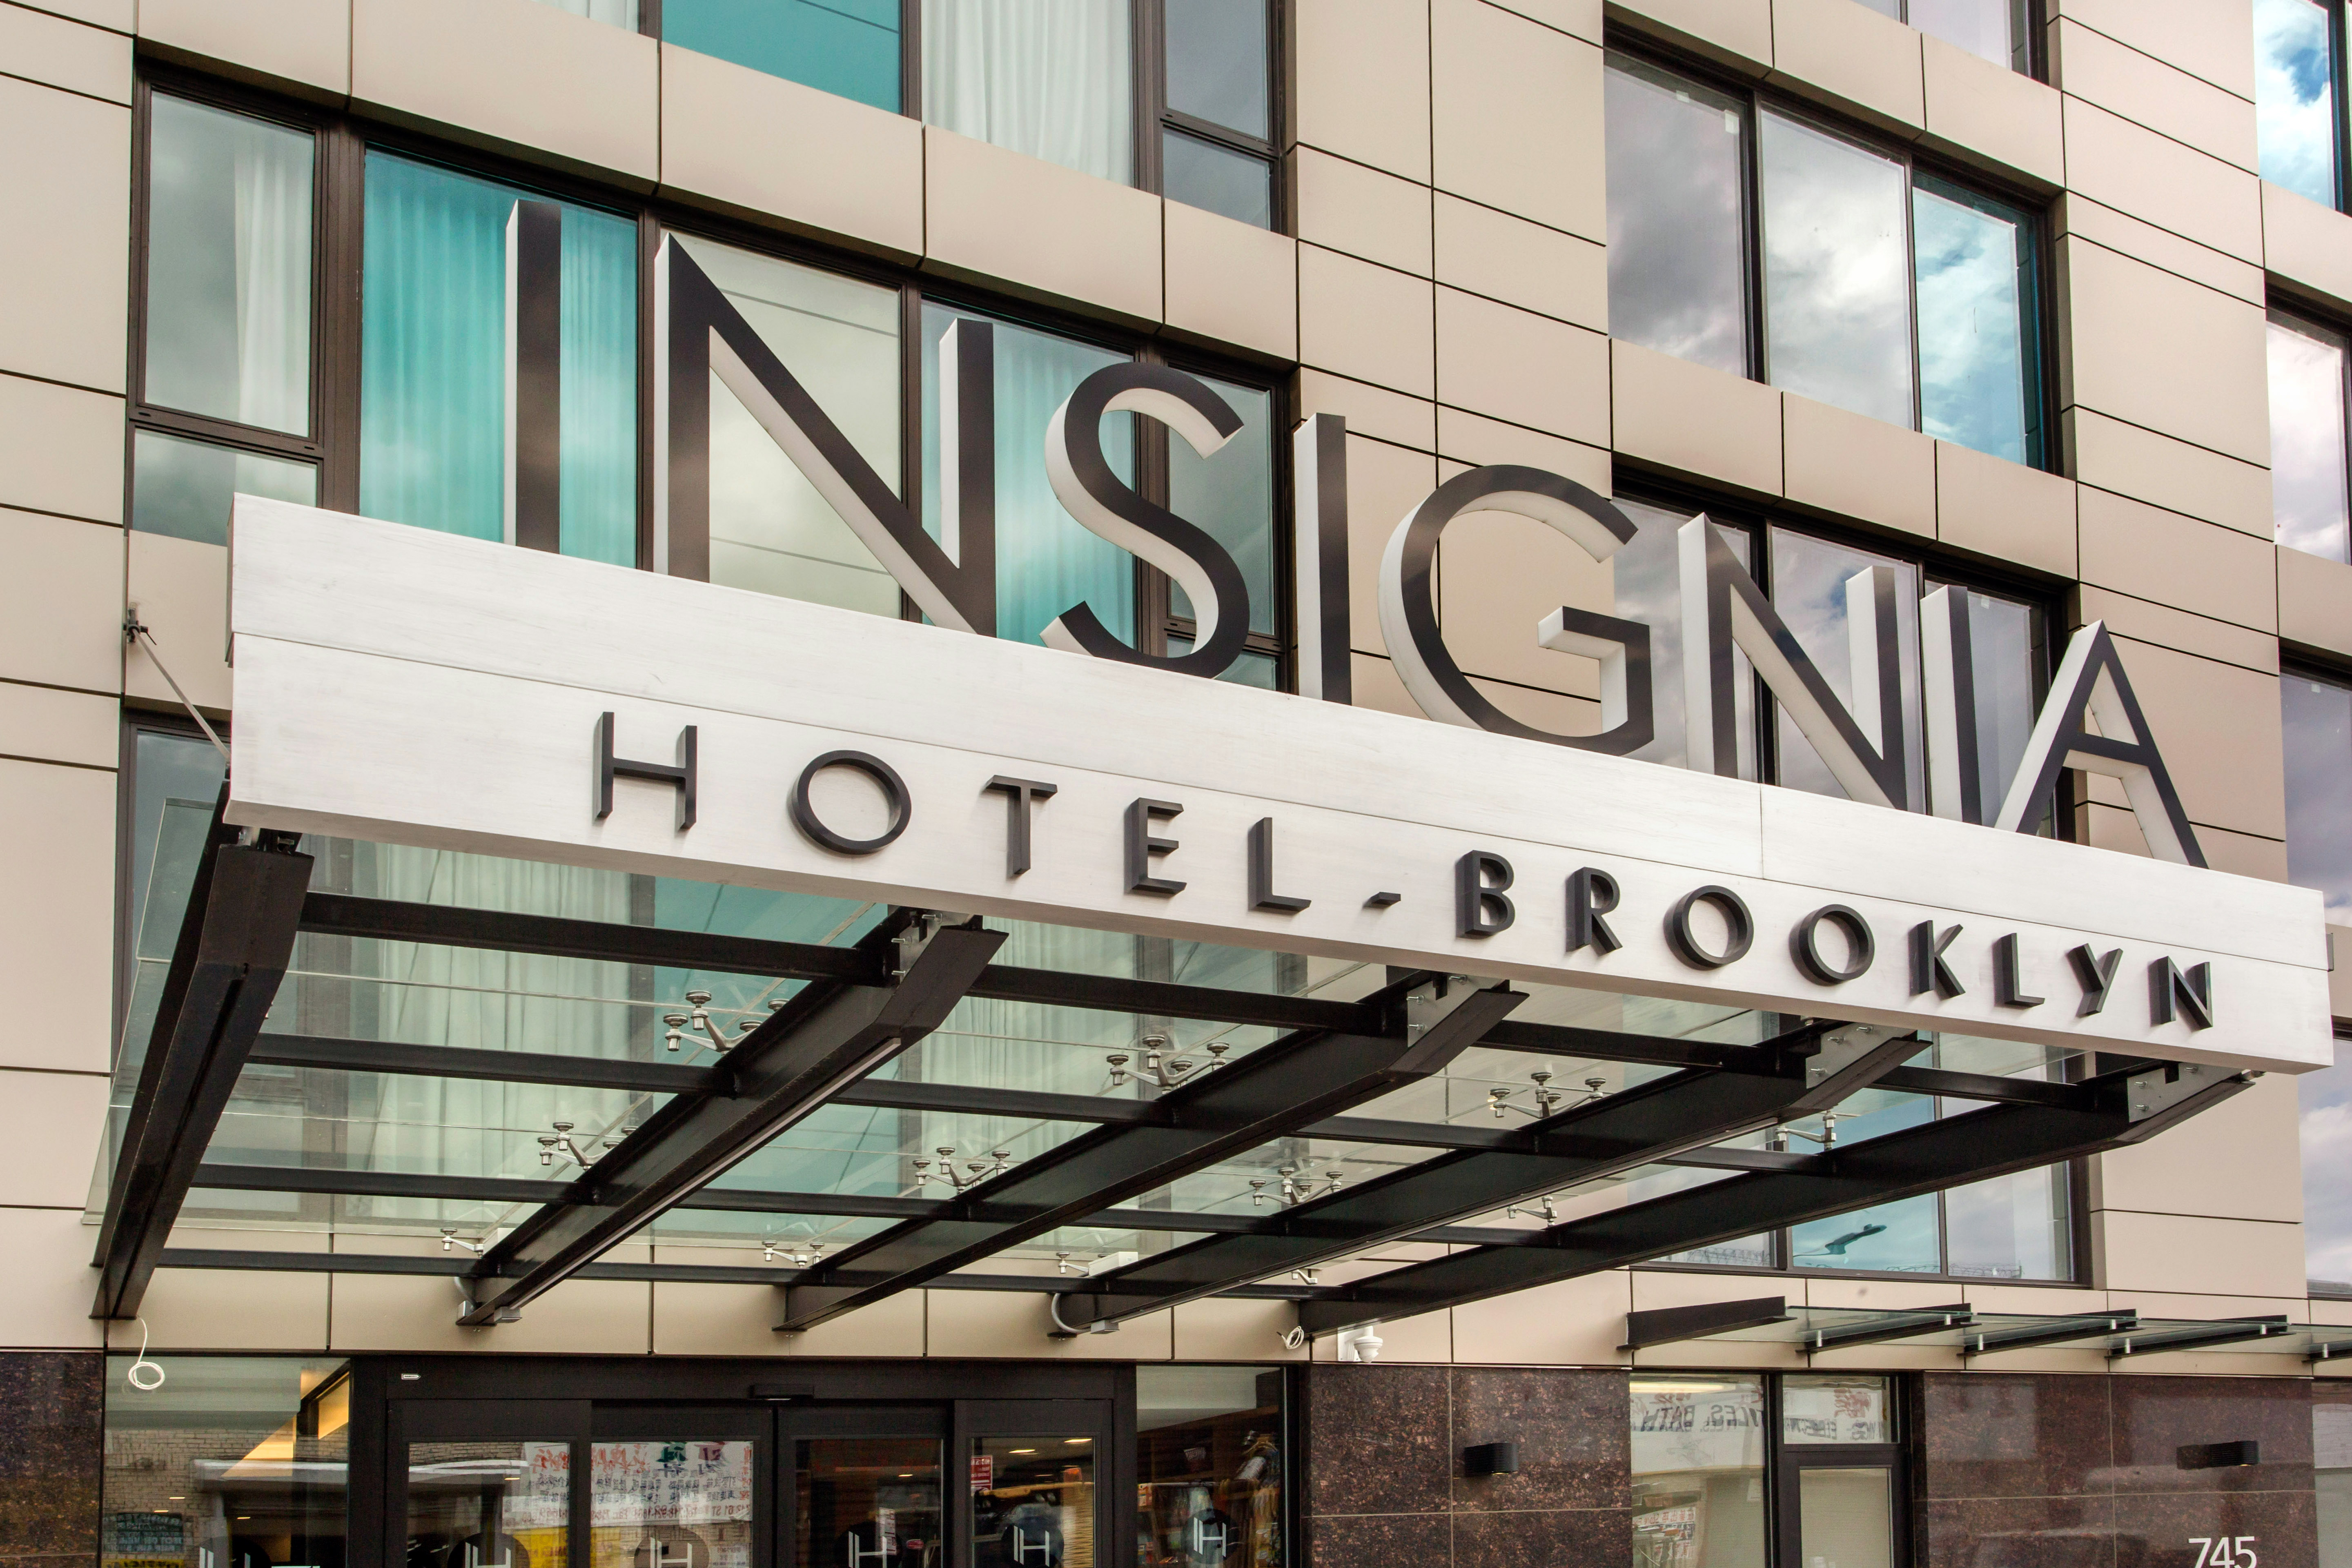 exterior of hotel with insignia sign